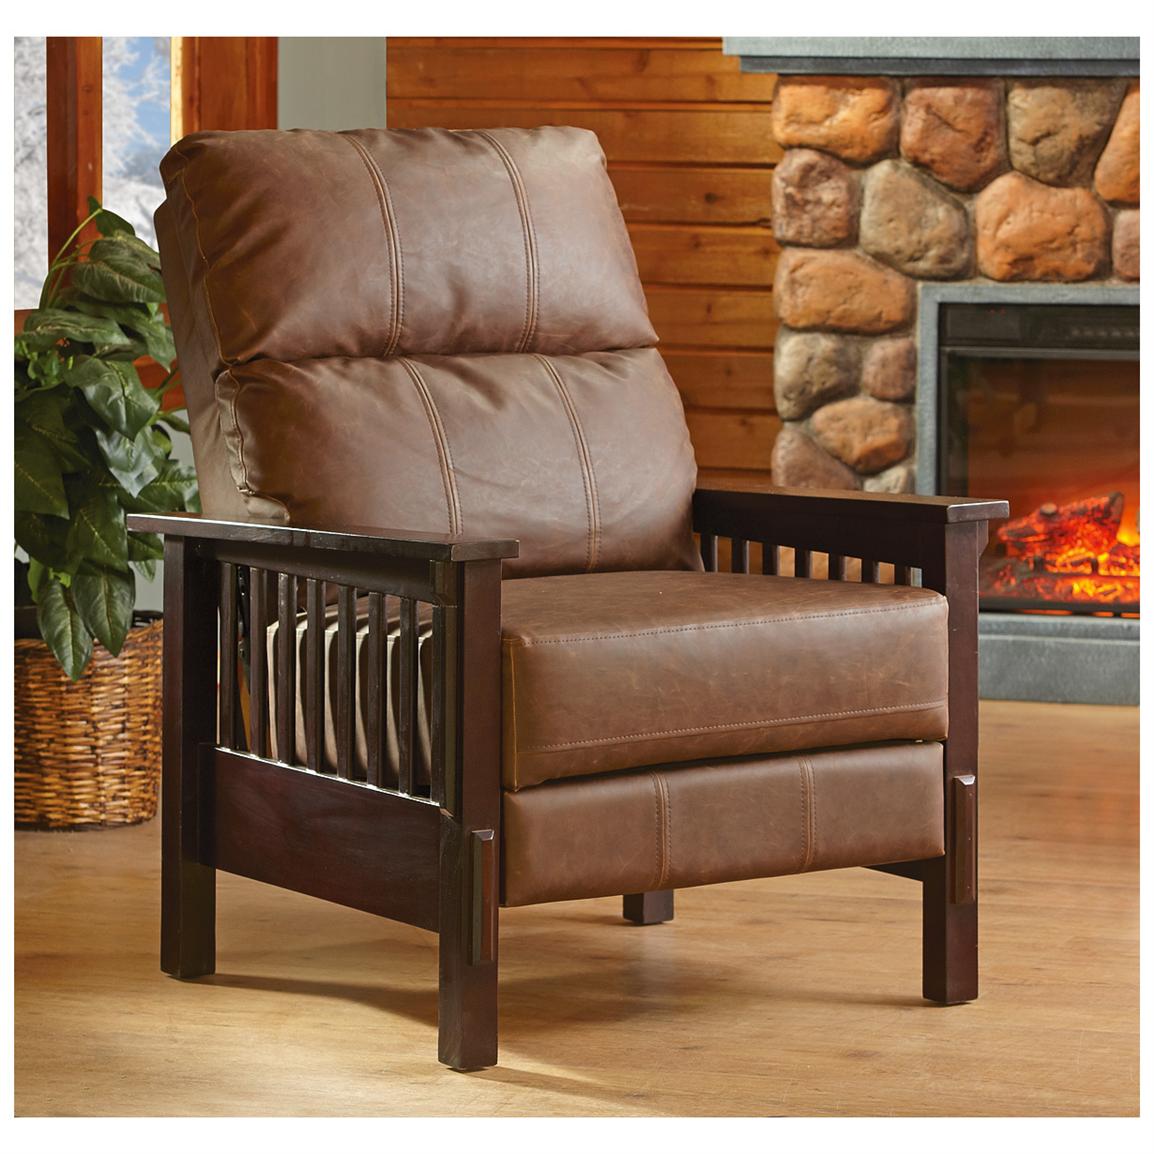 CASTLECREEK Mission Style Recliner 299493 Living Room At